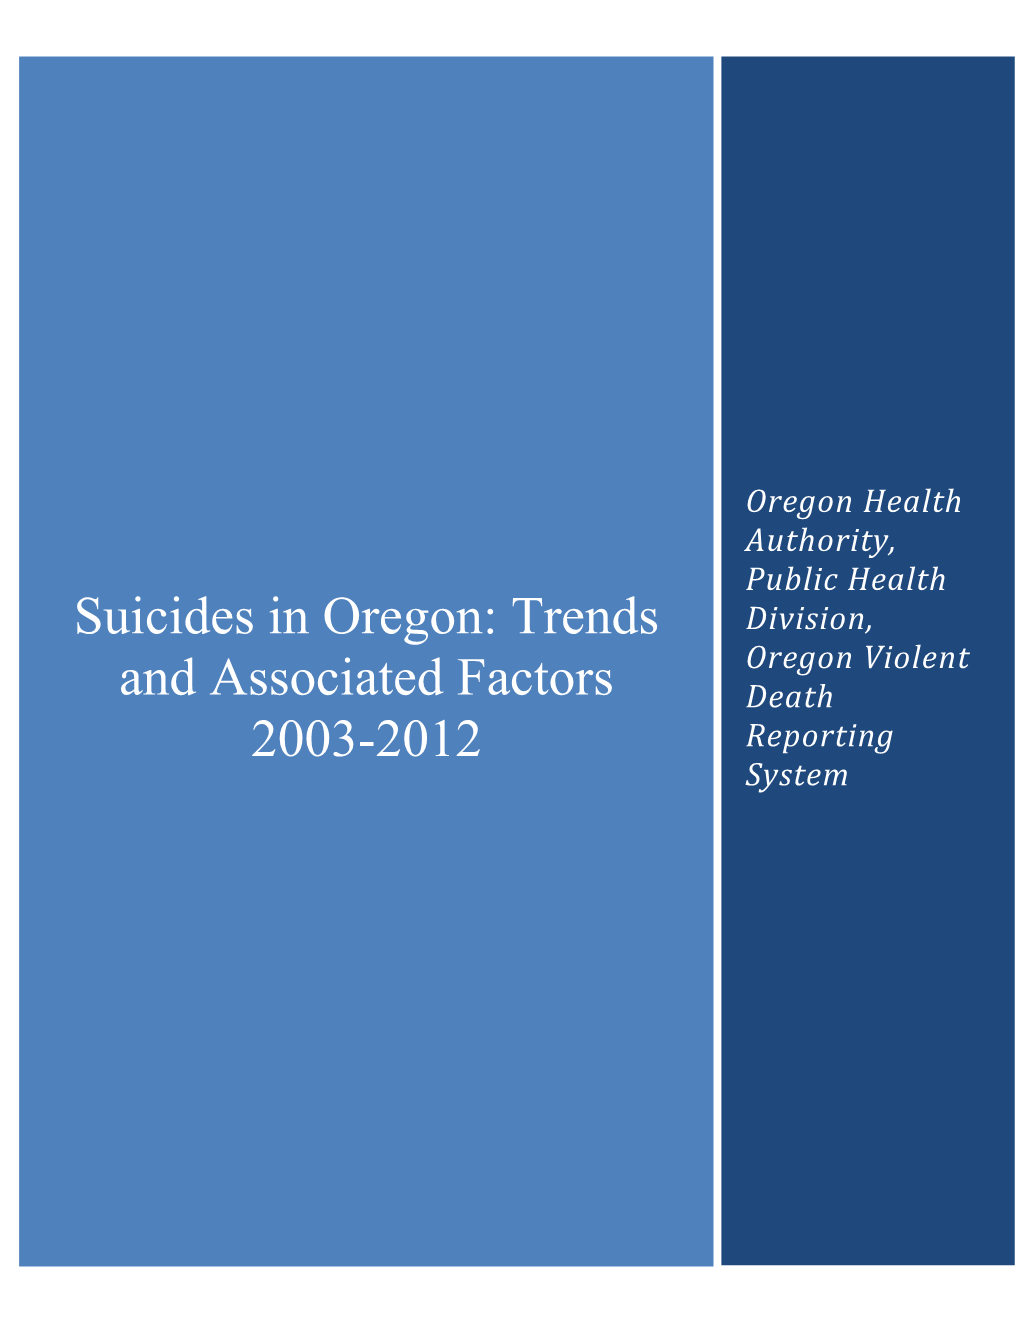 Suicides in Oregon: Trends and Associated Factors 2003-2012